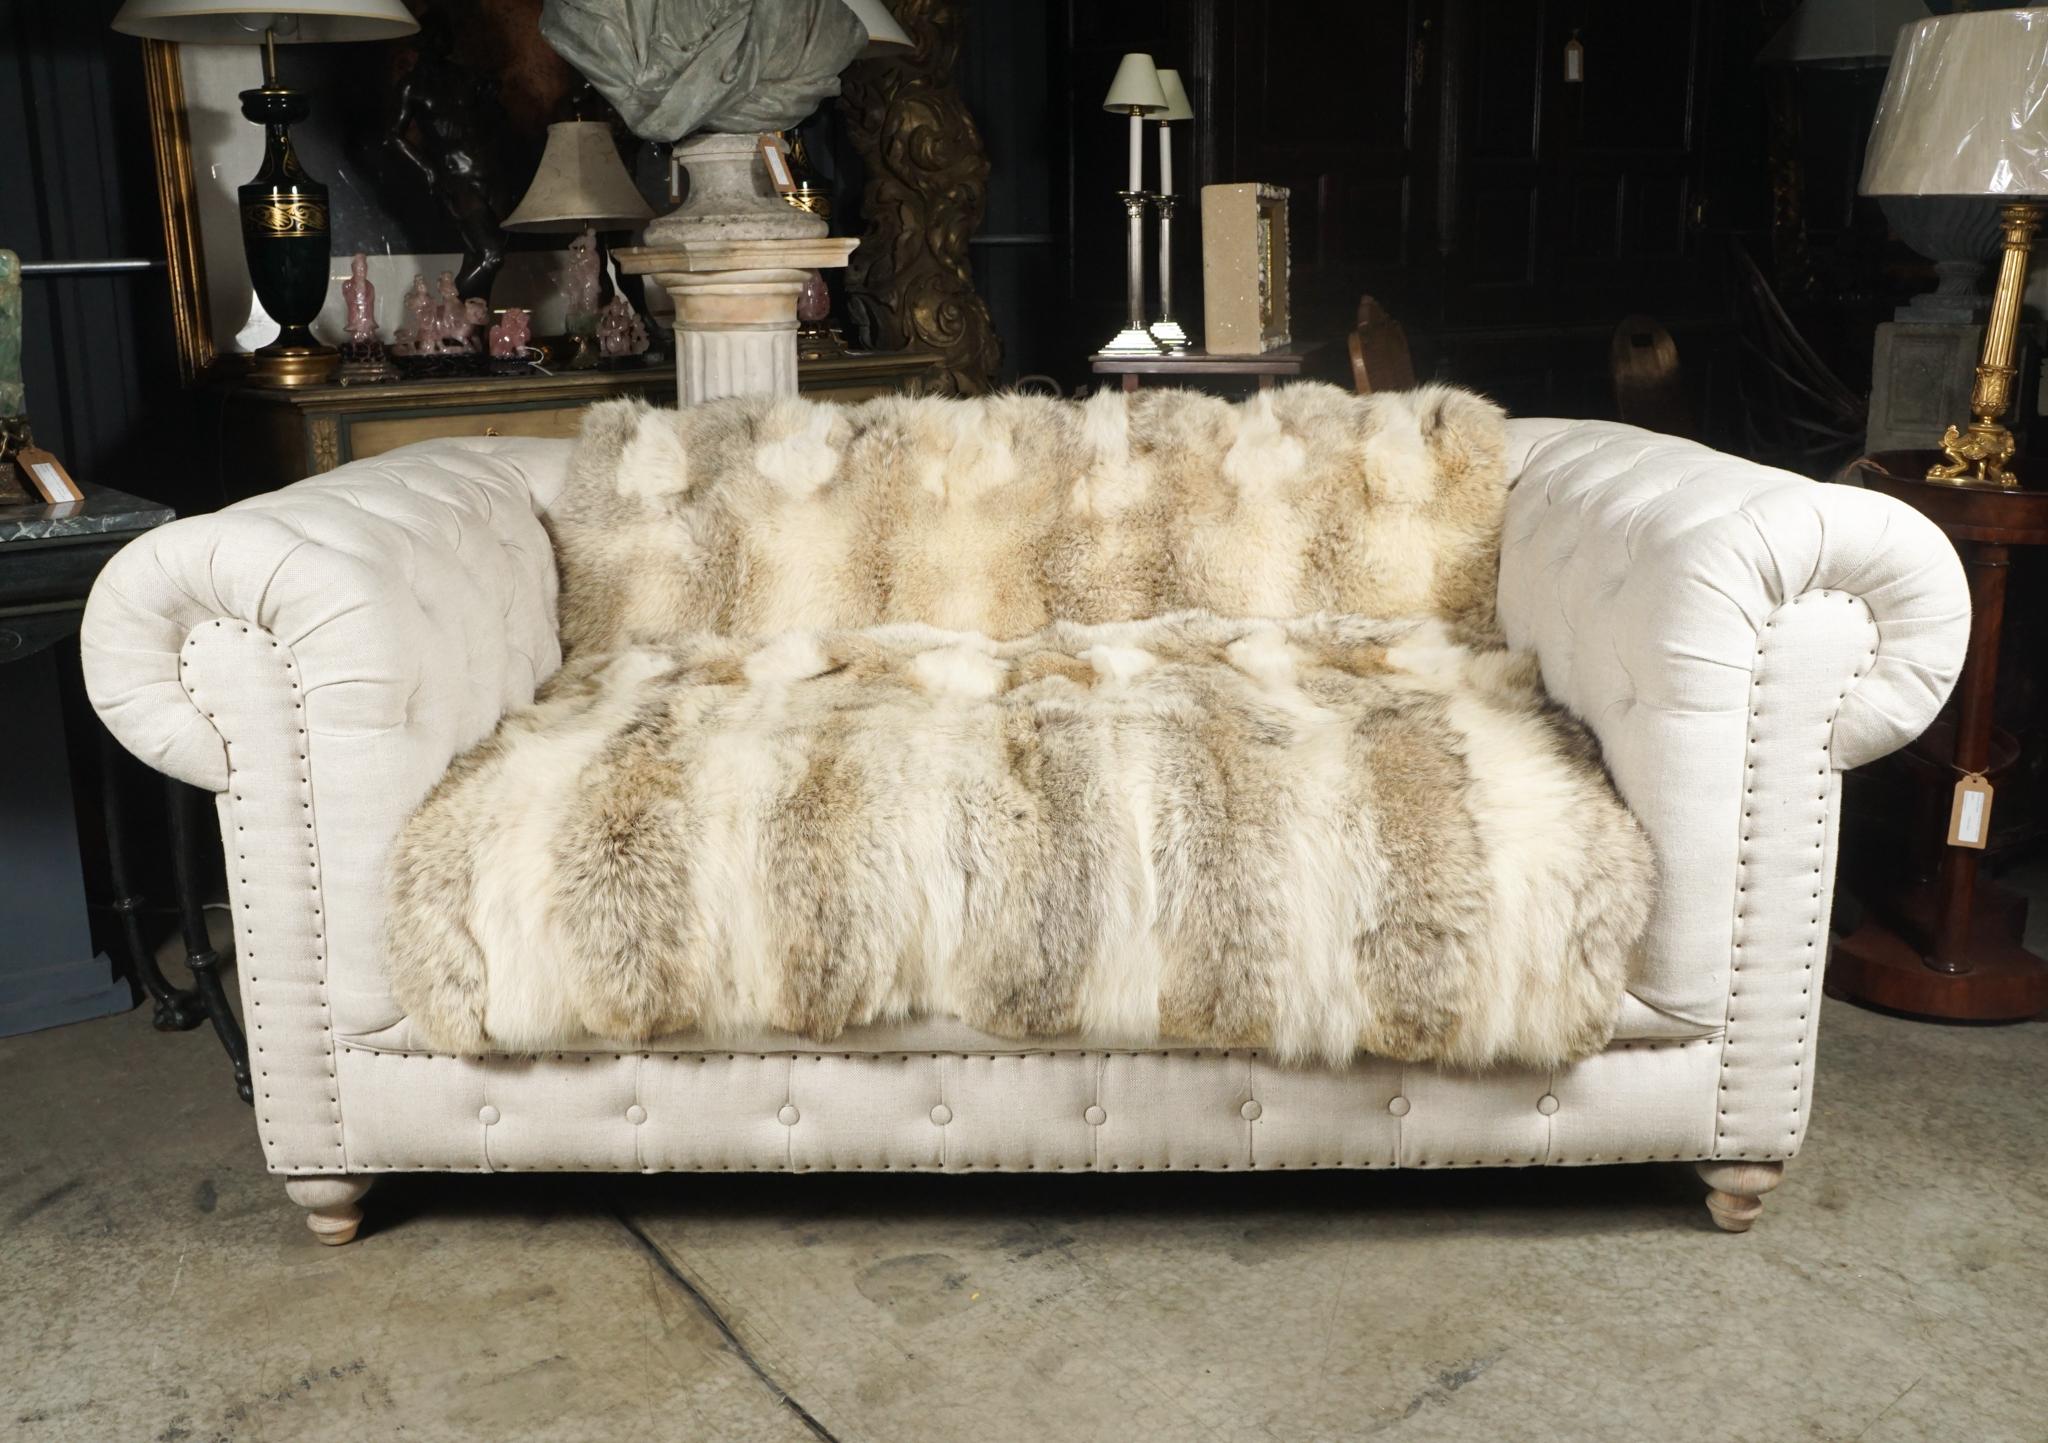 This vintage Edwardian style button tufted chesterfield has been gently used and shows no sign of abuse and very little use. Fashioned as if it came from an English interior circa 1900 but updated to a more casual and modern aspect with the cream